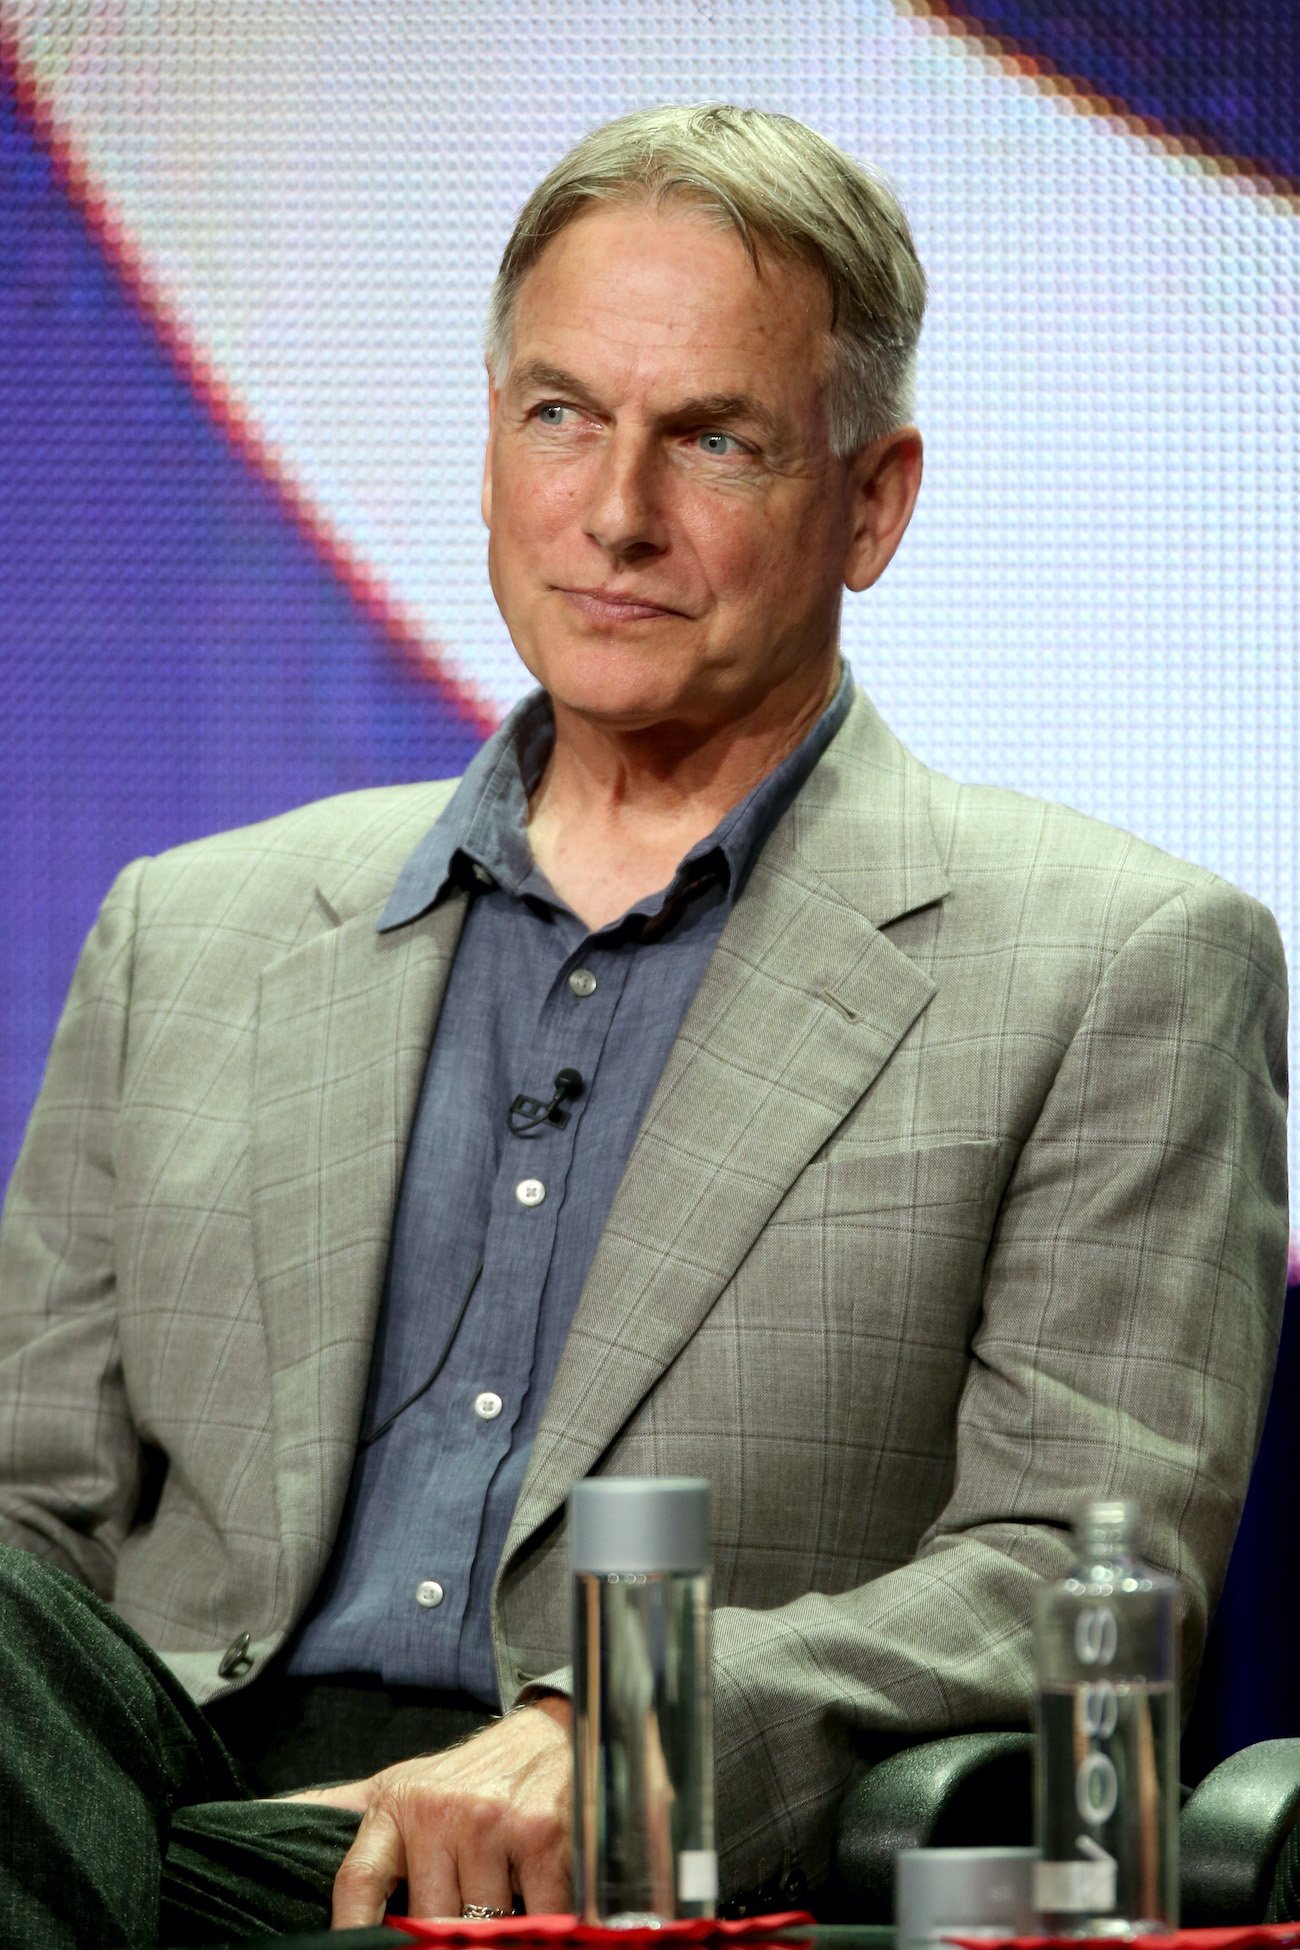 The Character ‘NCIS’ Star Mark Harmon Described as a ‘Change-of-Pace’